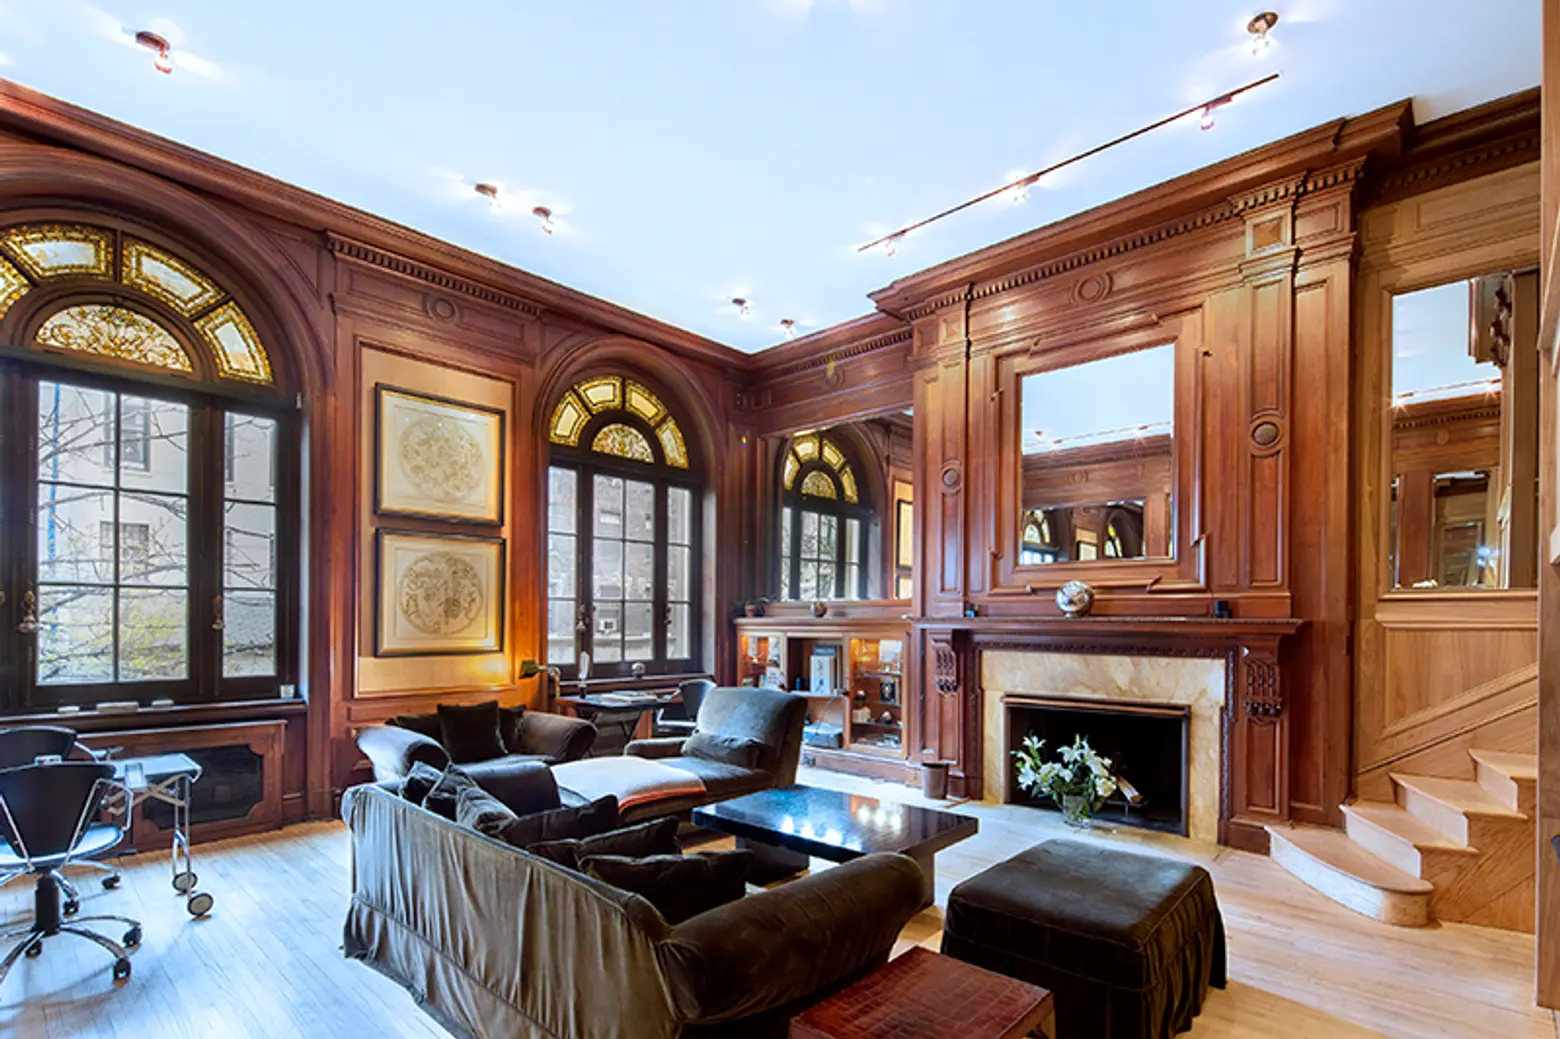 $4M UES Limestone Mansion Duplex Wows With Tiffany Windows, a Fireplace and an Elevator